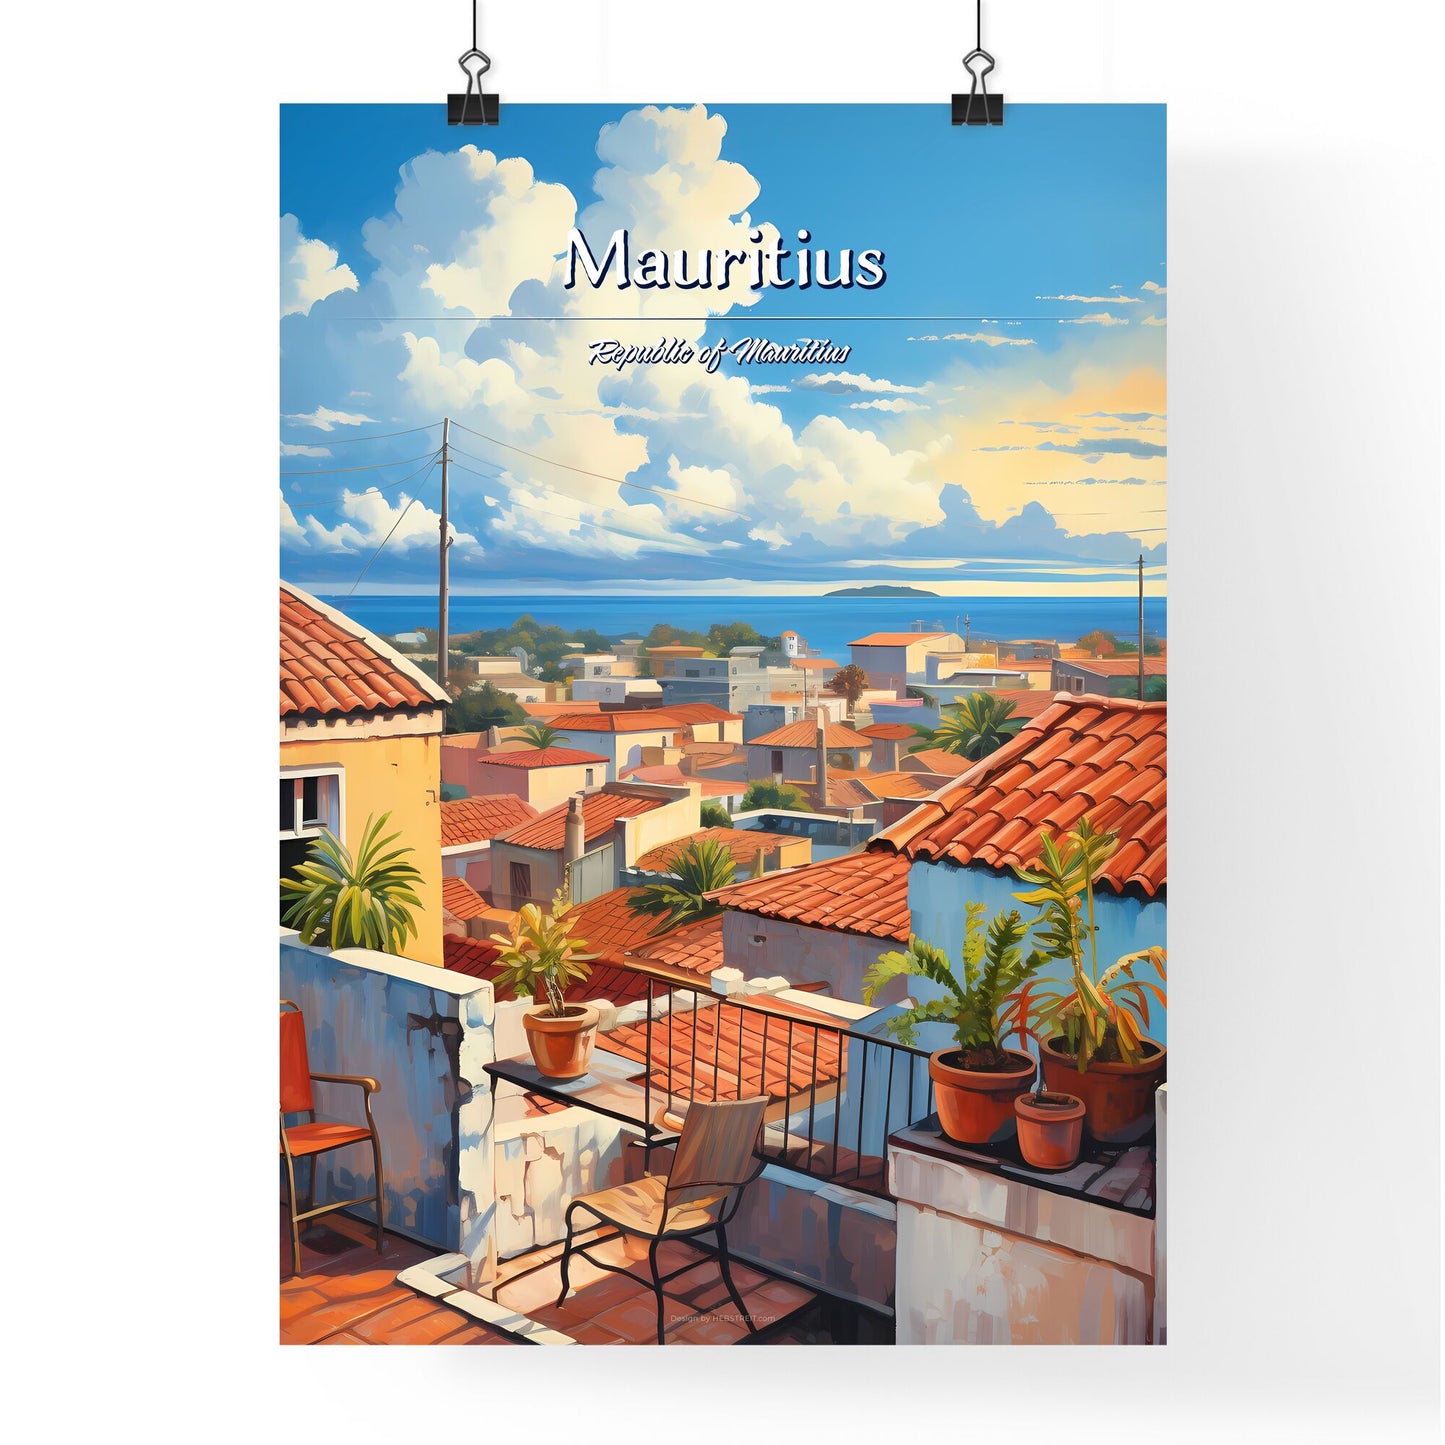 On the roofs of Mauritius, Republic of Mauritius - Art print of a rooftops of a town with plants and a body of water Default Title